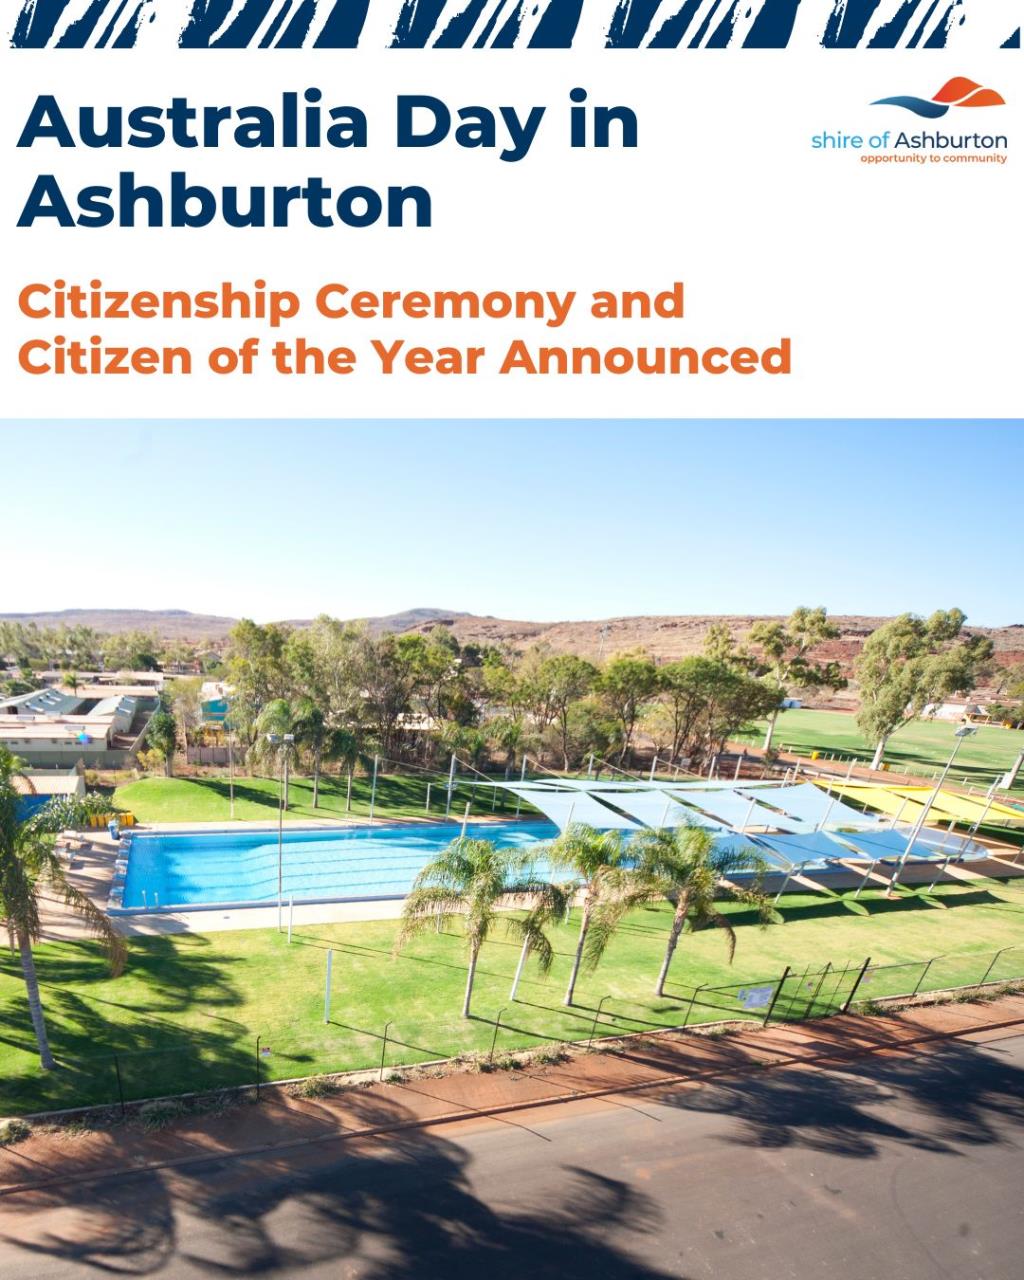 Join us for the Citizenship Ceremony and Citizen of the Year Awards